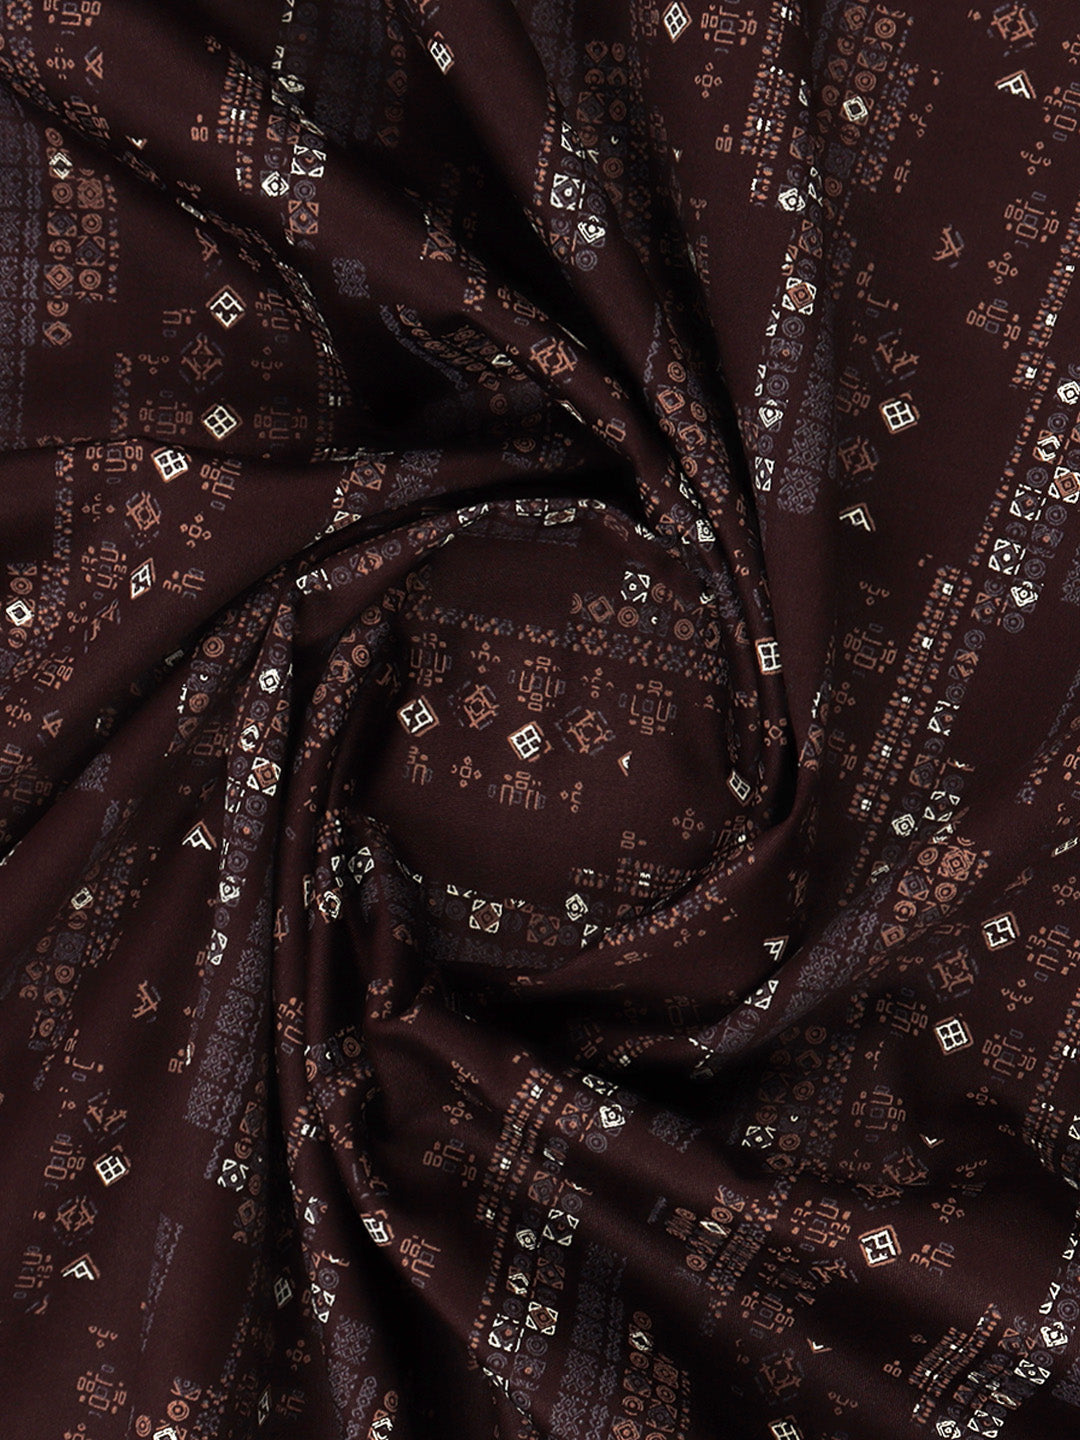 100% Cotton Dark Maroon Over All Printed Shirt Fabric Alpha -Close view